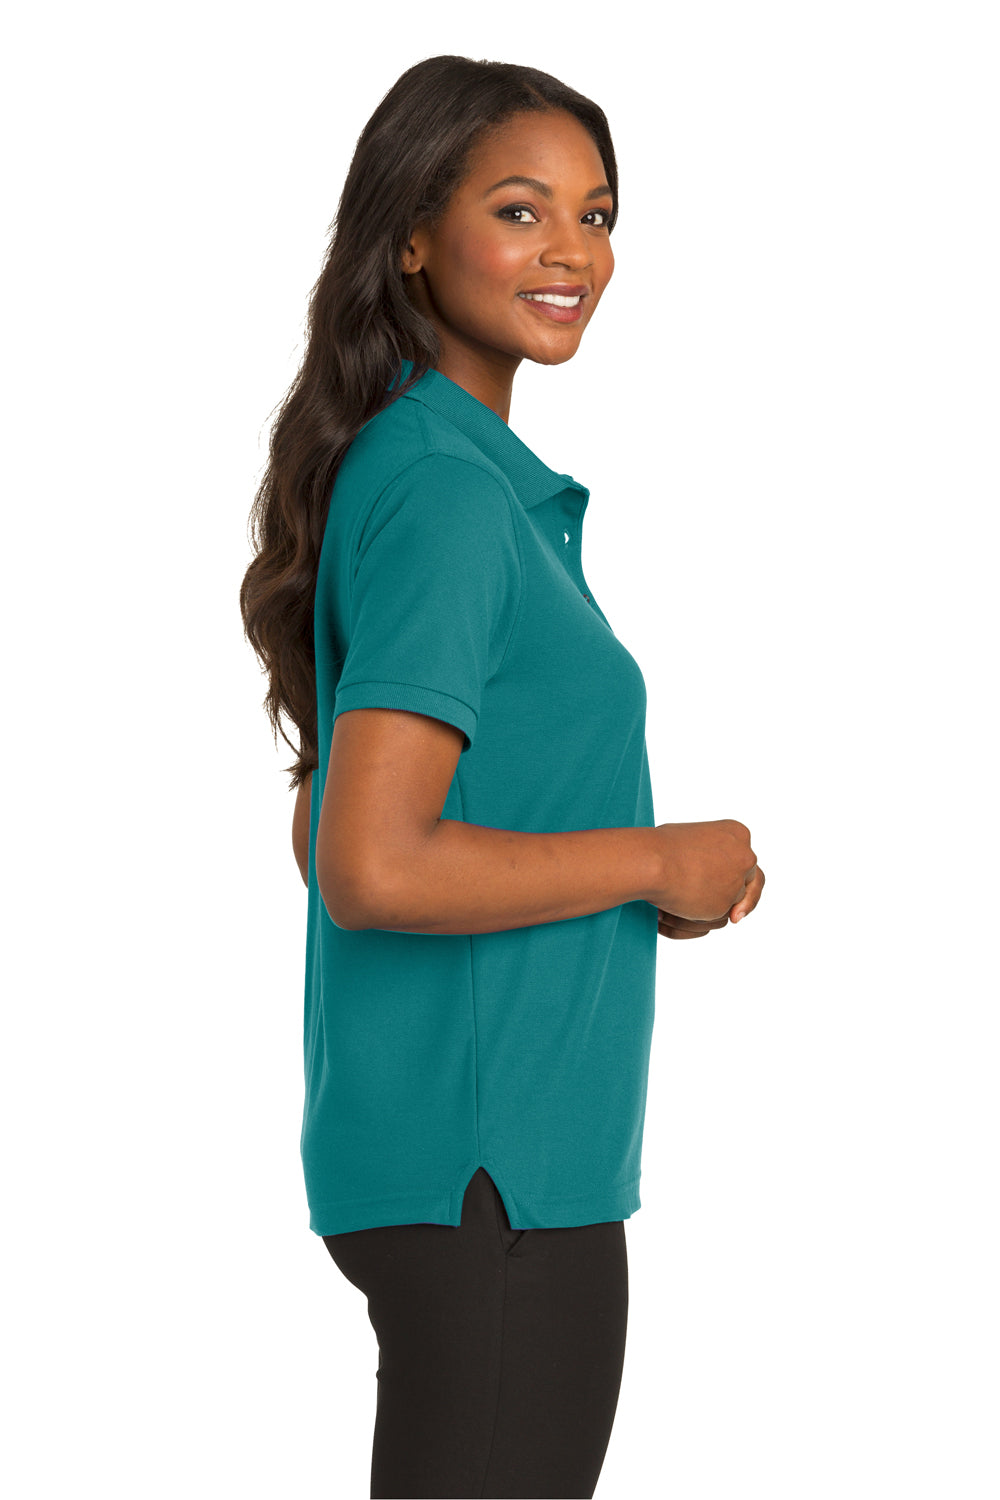 Port Authority L500 Womens Silk Touch Wrinkle Resistant Short Sleeve Polo Shirt Teal Green Side